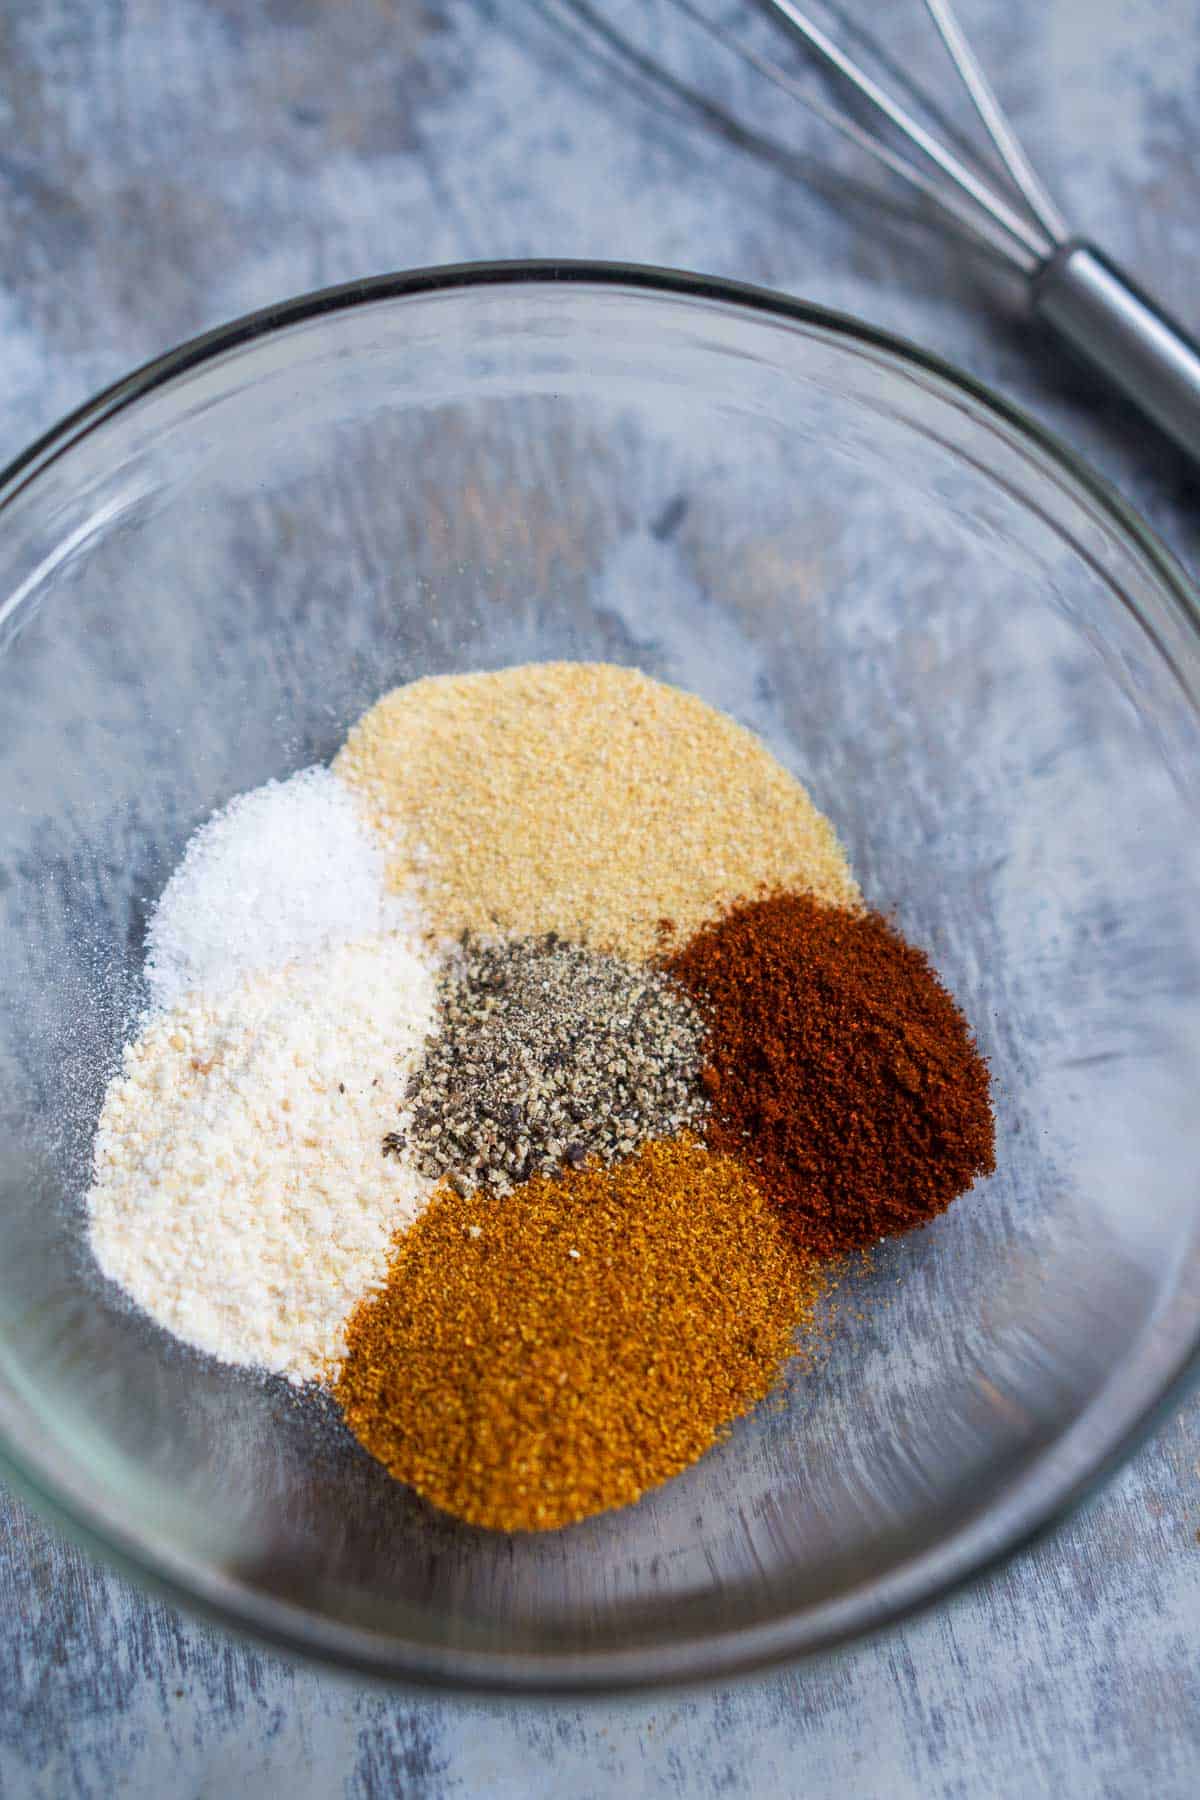 unmixed chicken seasoning spices in glass bowl